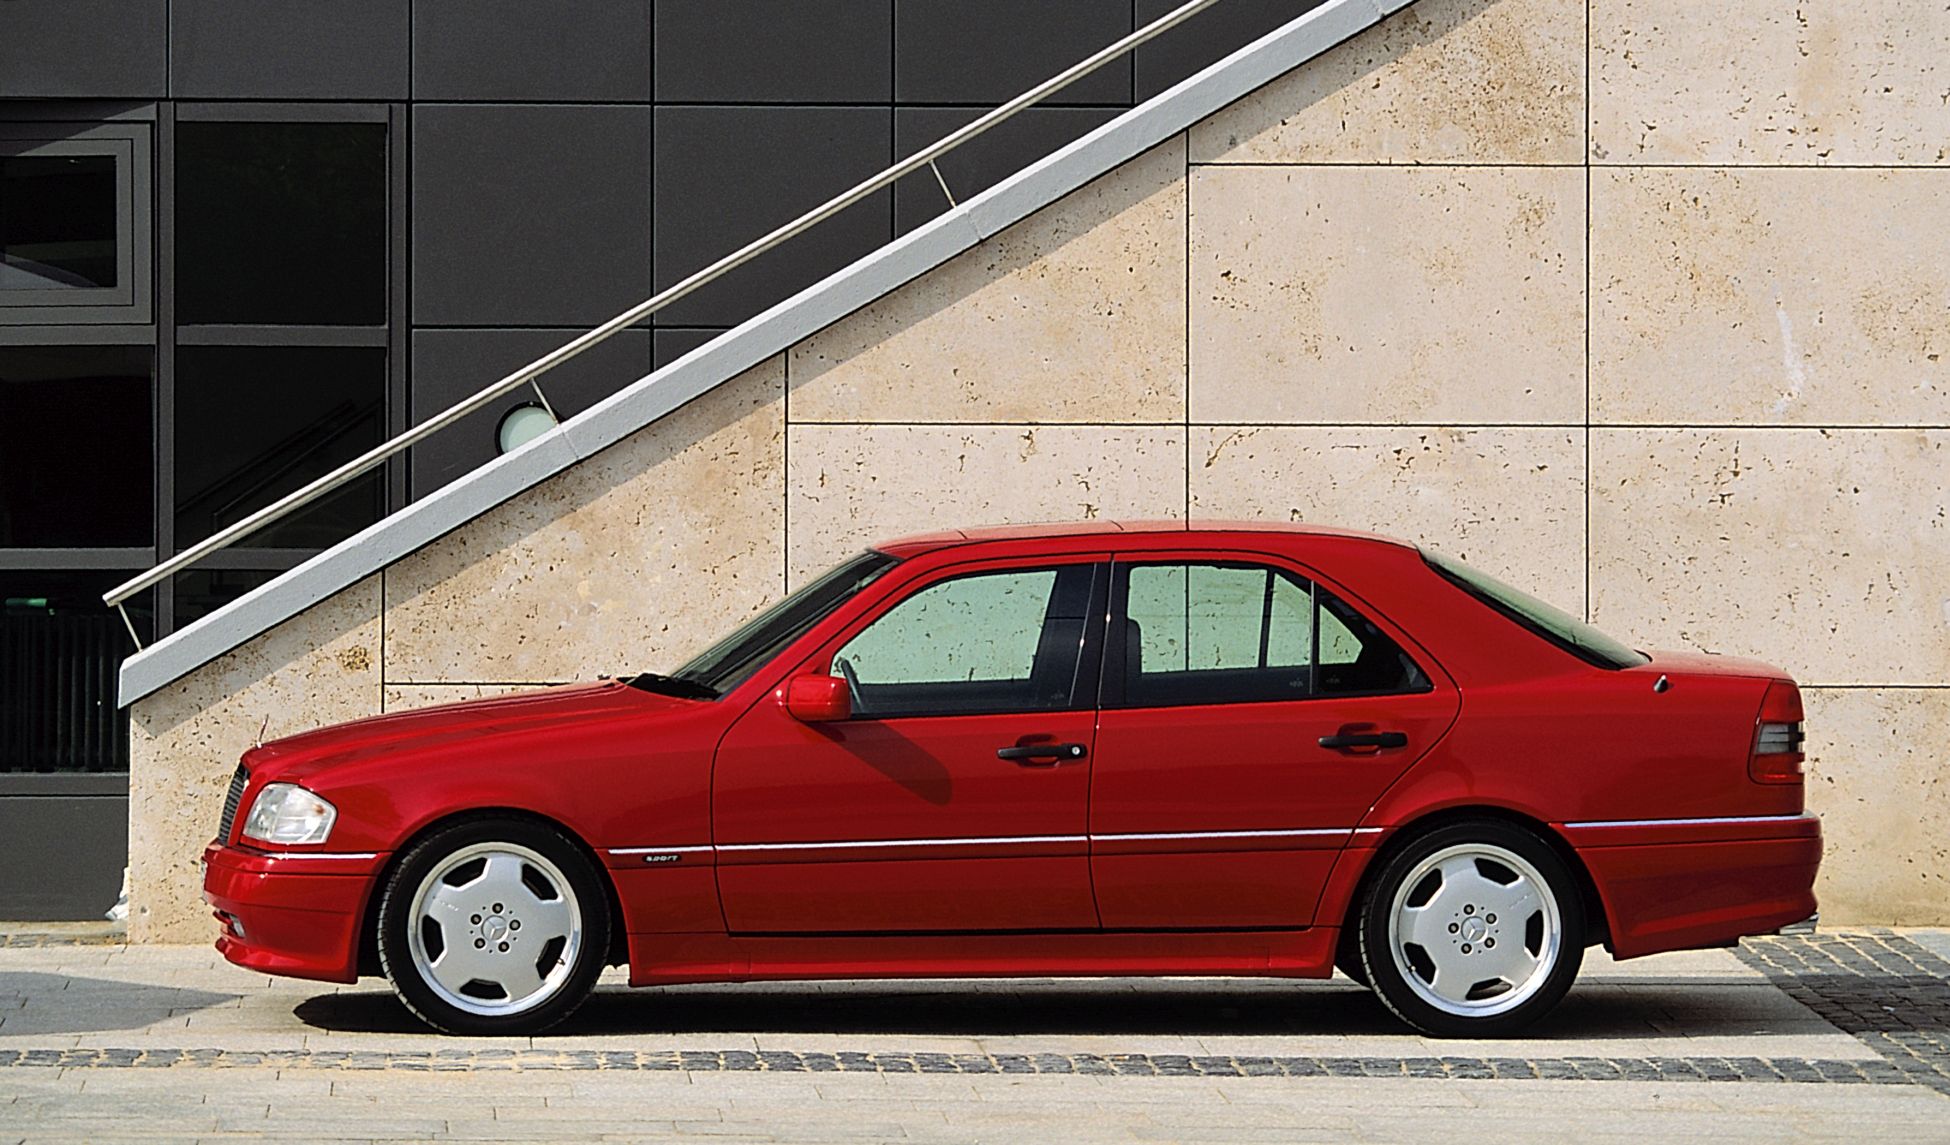 The Mercedes-Benz W202 Is the Very First and Best C-Class Ever Made 